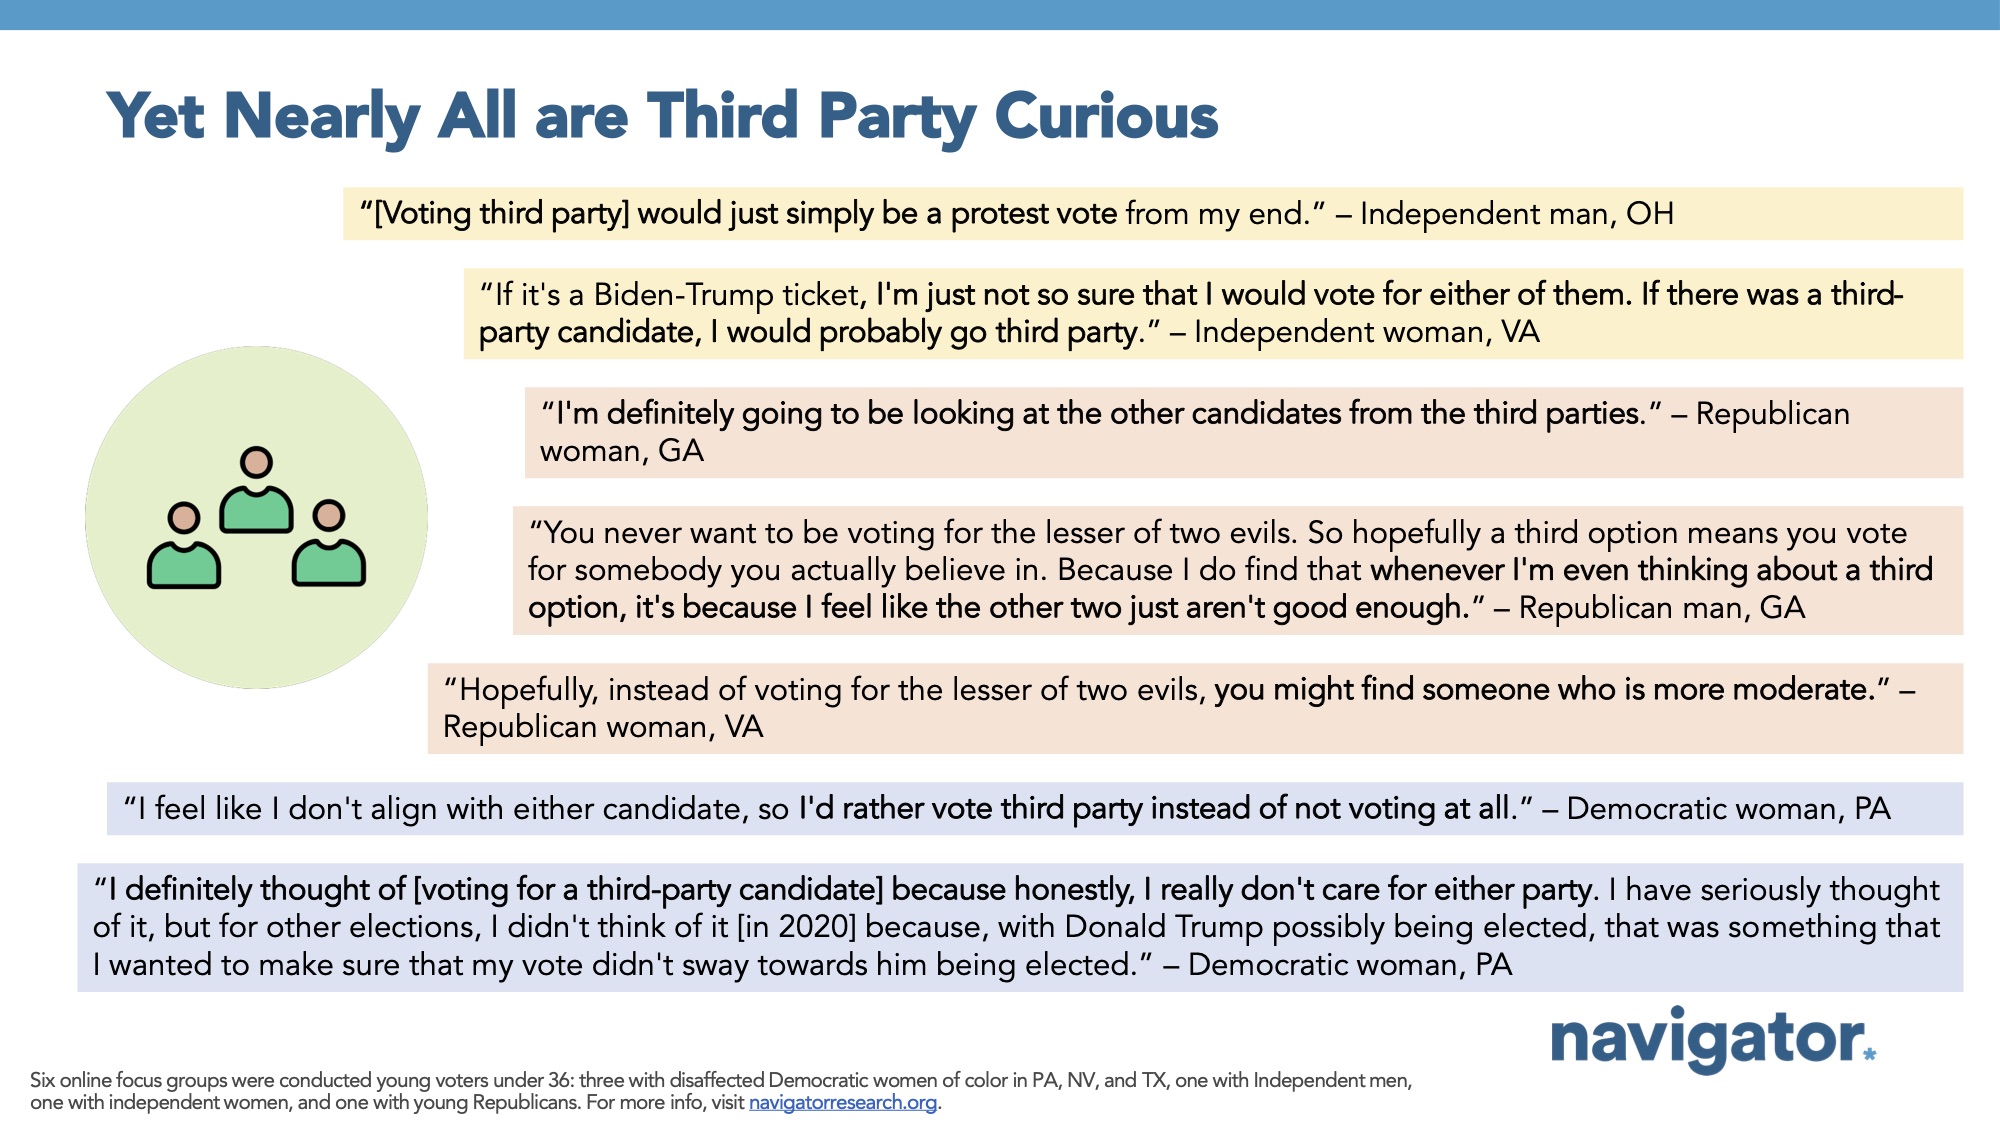 Focus group report slide titled: Yet Nearly All are Third Party Curious